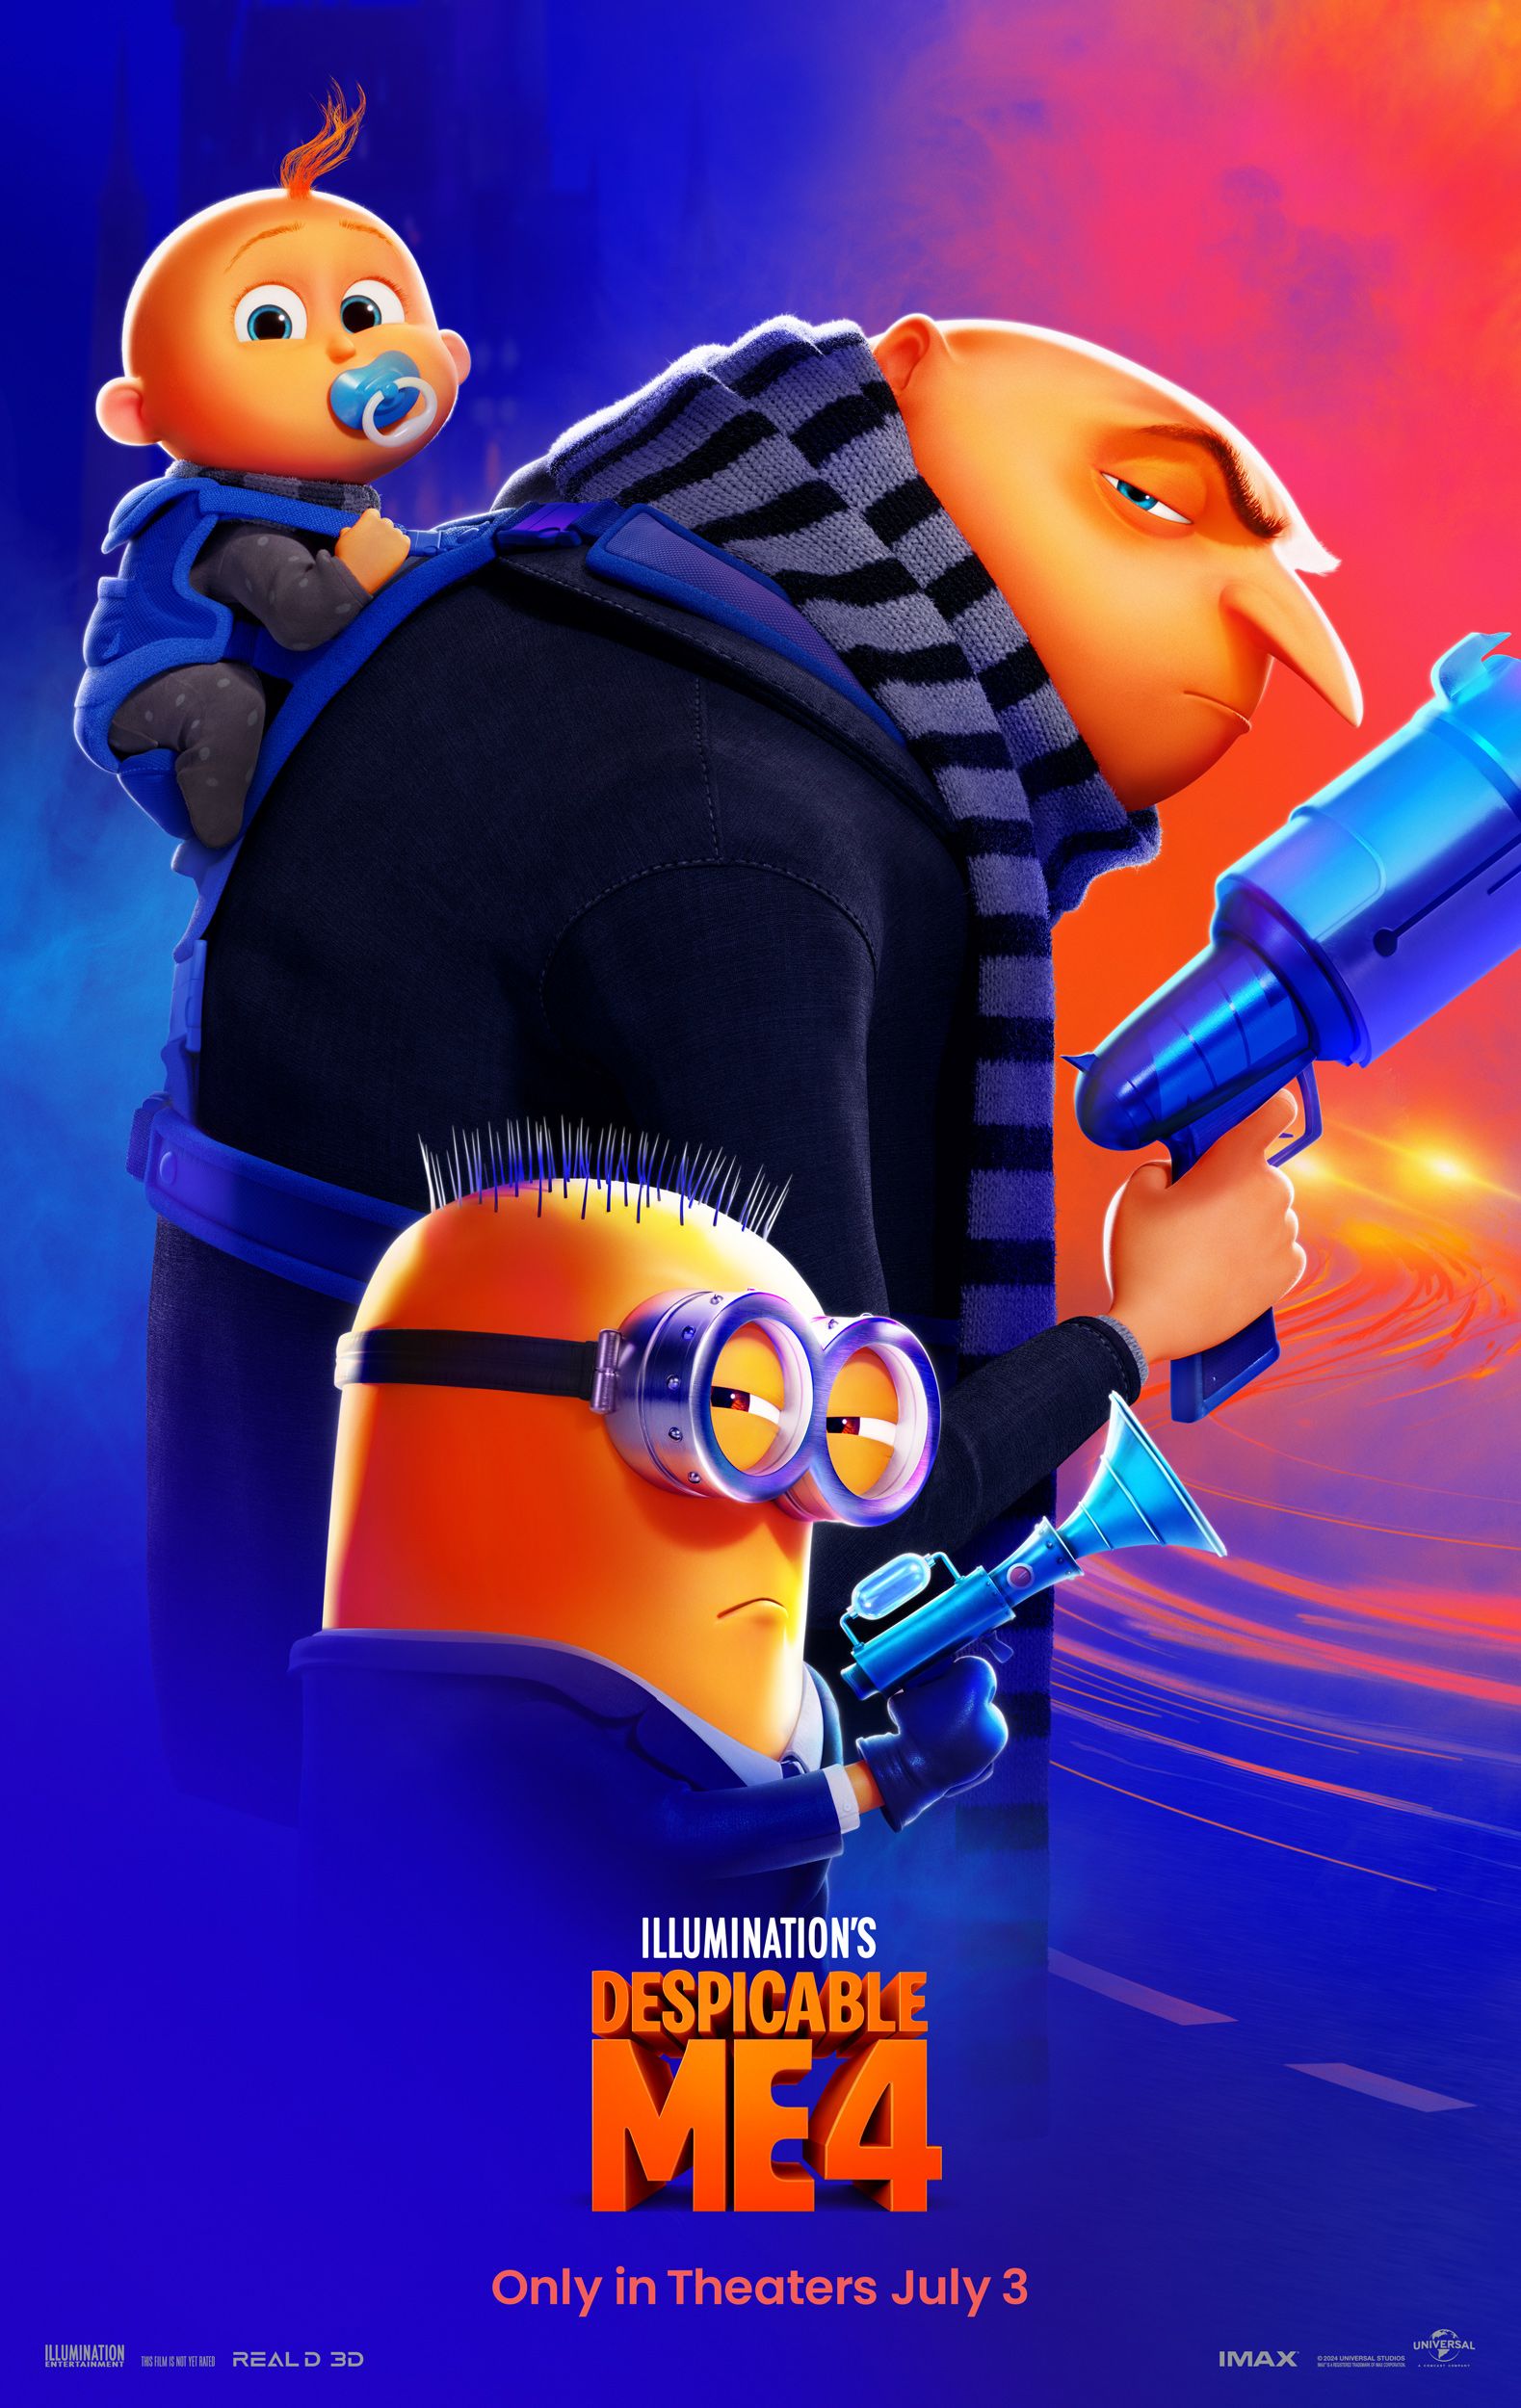 Poster for Despicable Me 4, showing Gru with his son and a minion with a gun